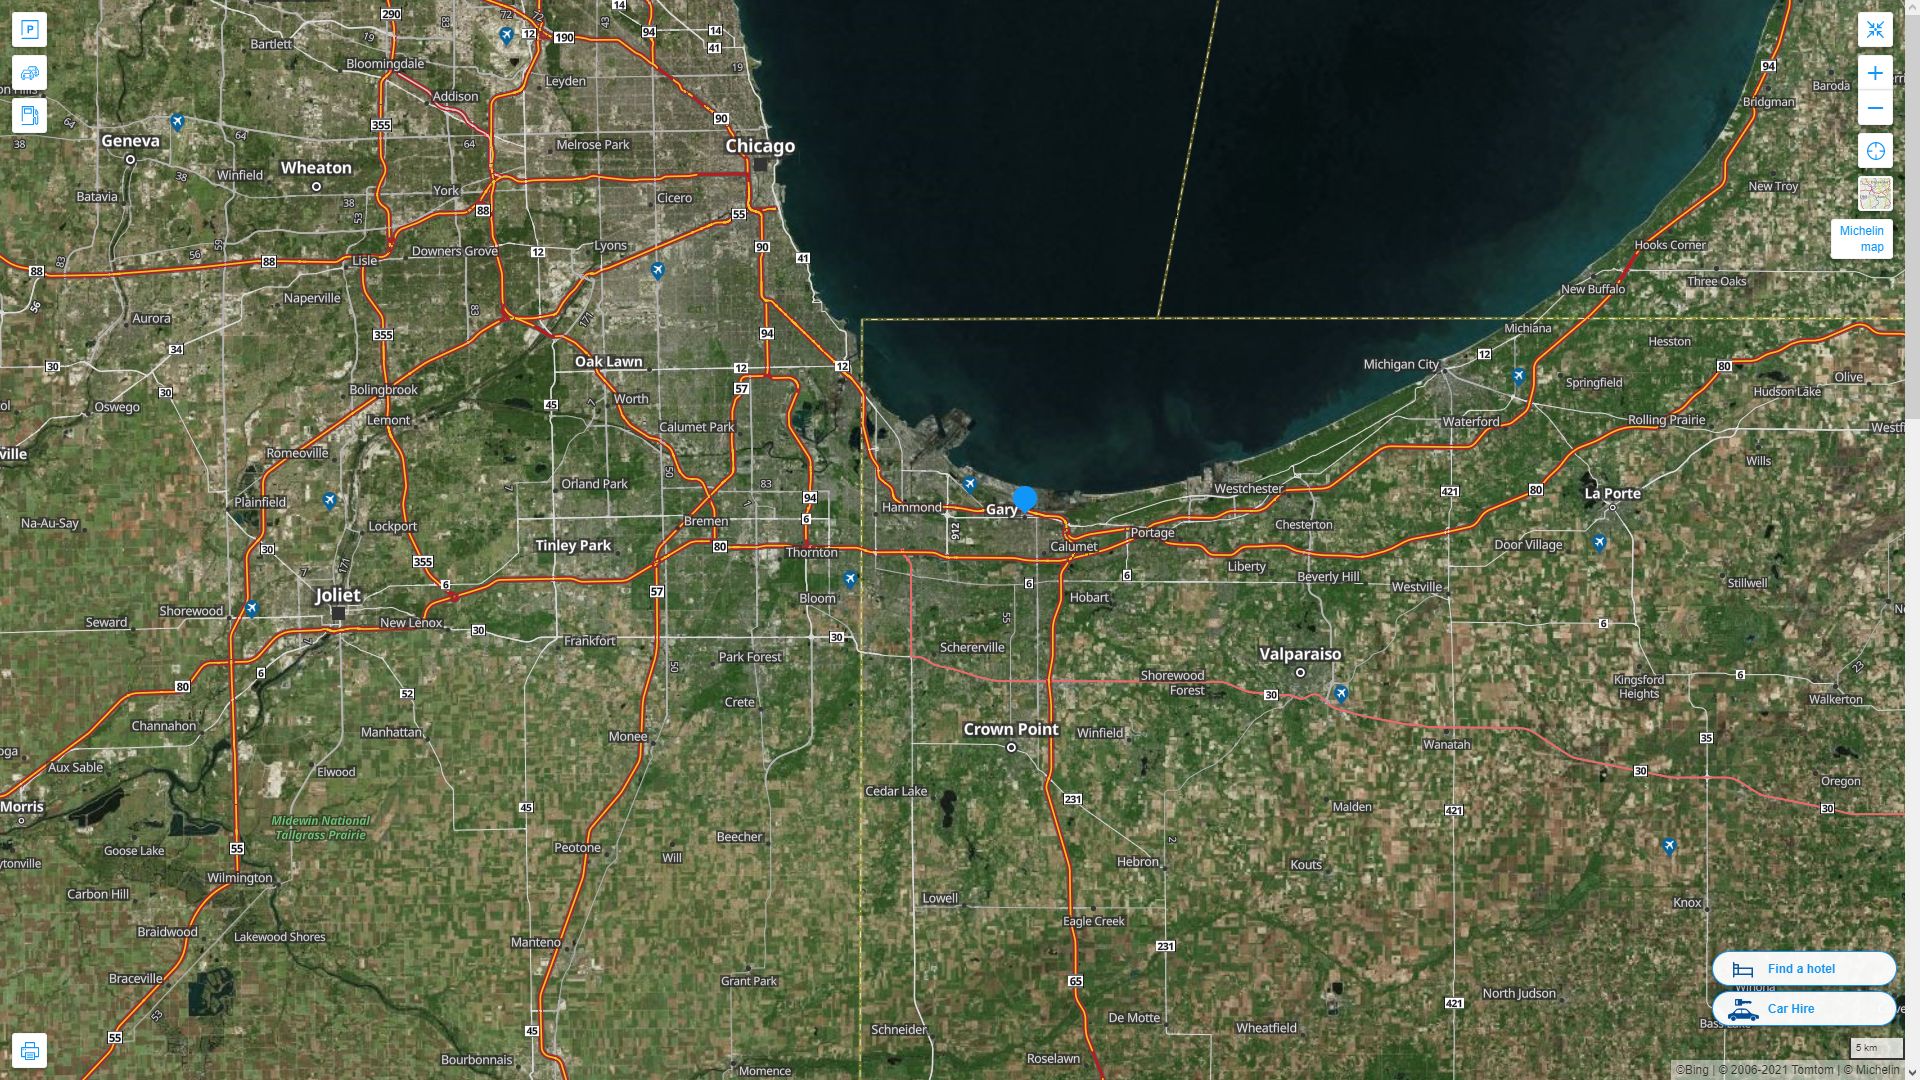 Gary Indiana Highway and Road Map with Satellite View